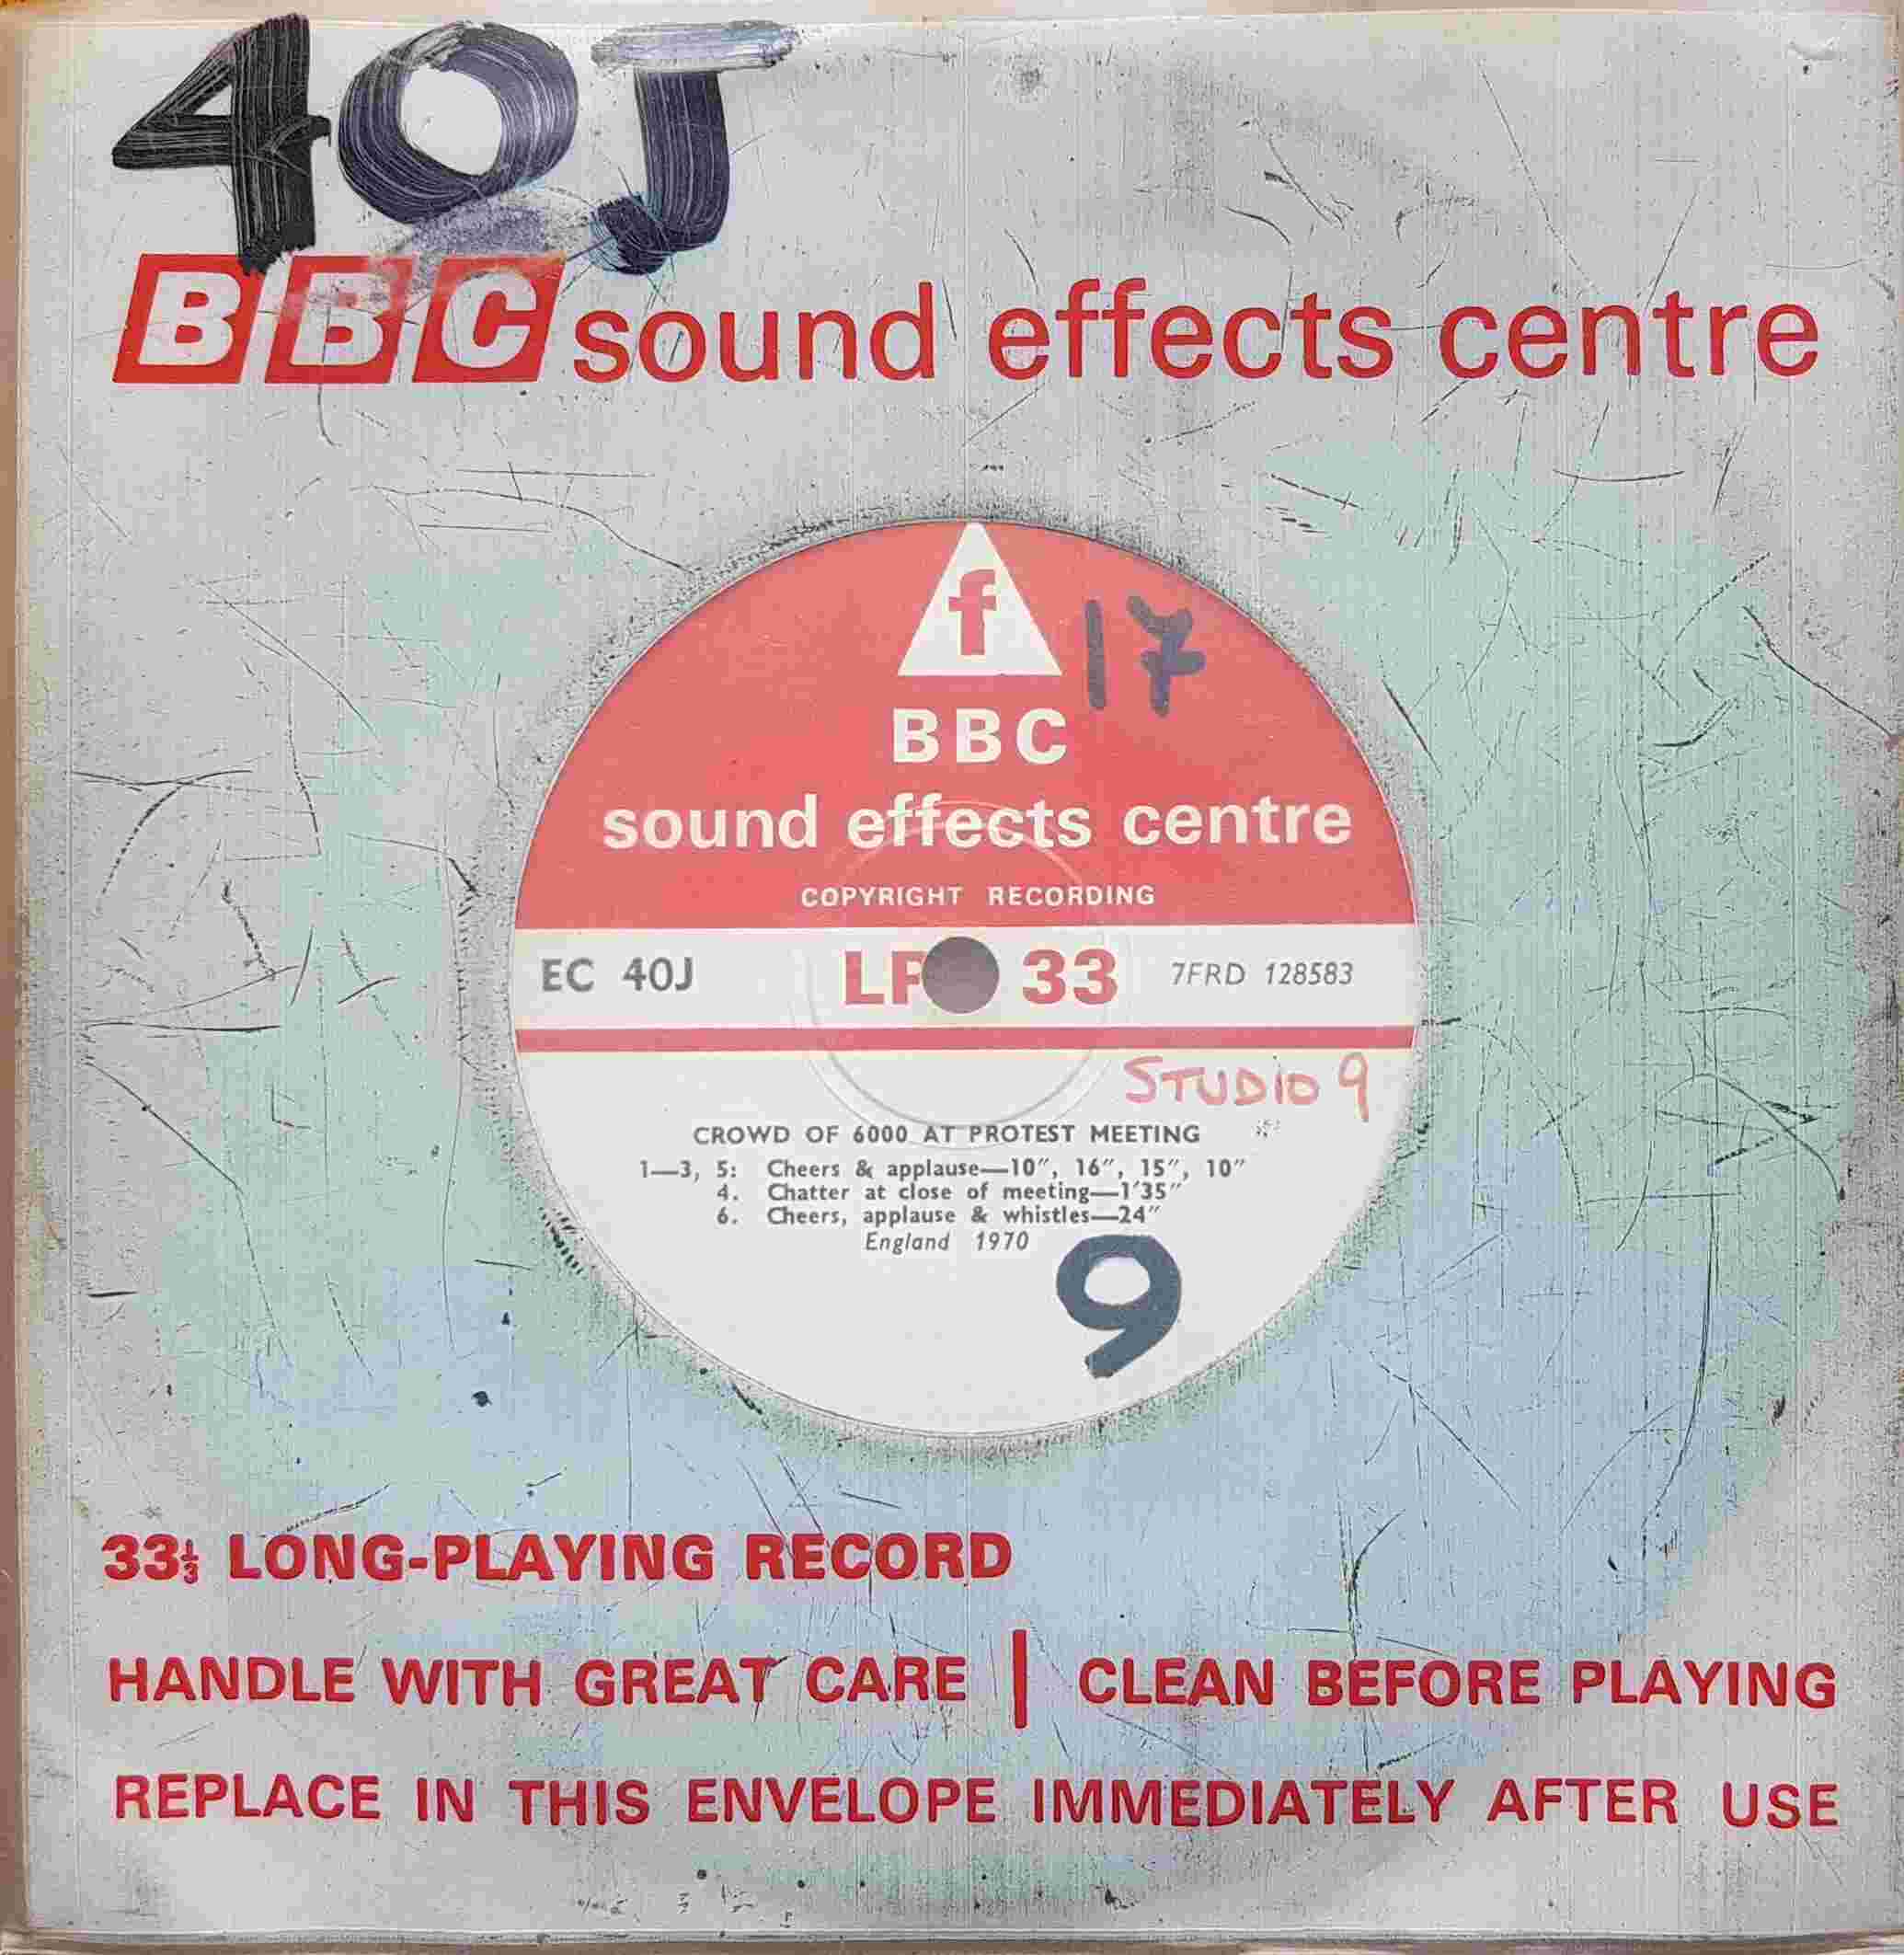 Picture of EC 40J Crowd of 6000 at protest meet - London 1970 by artist Not registered from the BBC singles - Records and Tapes library